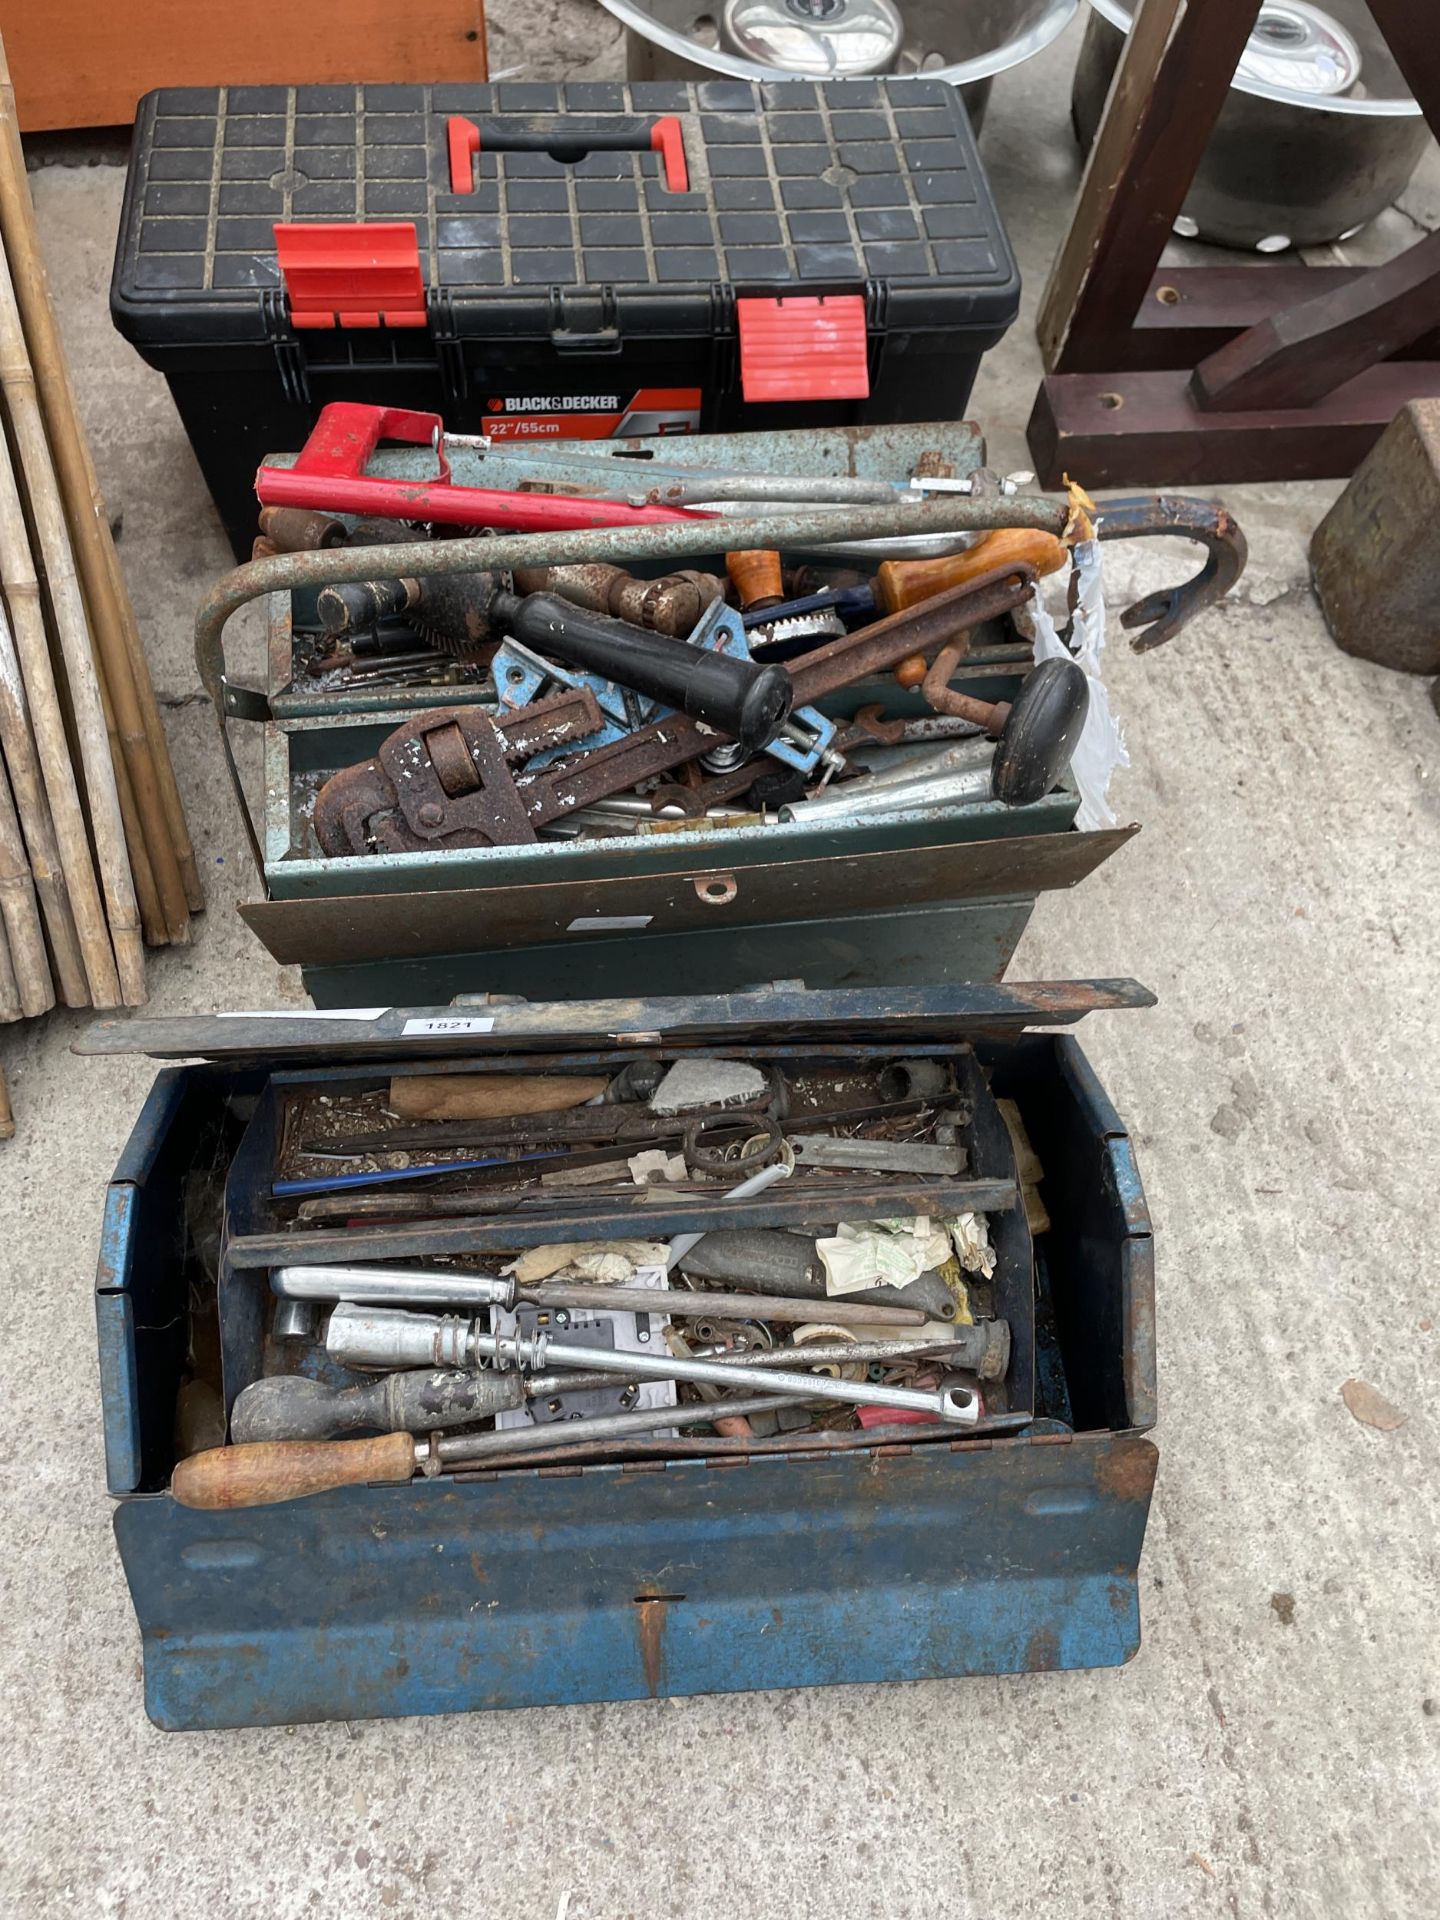 THREE VARIOUS TOOL BOXES AND AN ASSORTMENT OF HAND TOOLS TO INCLUDE STILSENS, SCREW DRIVERS AND A